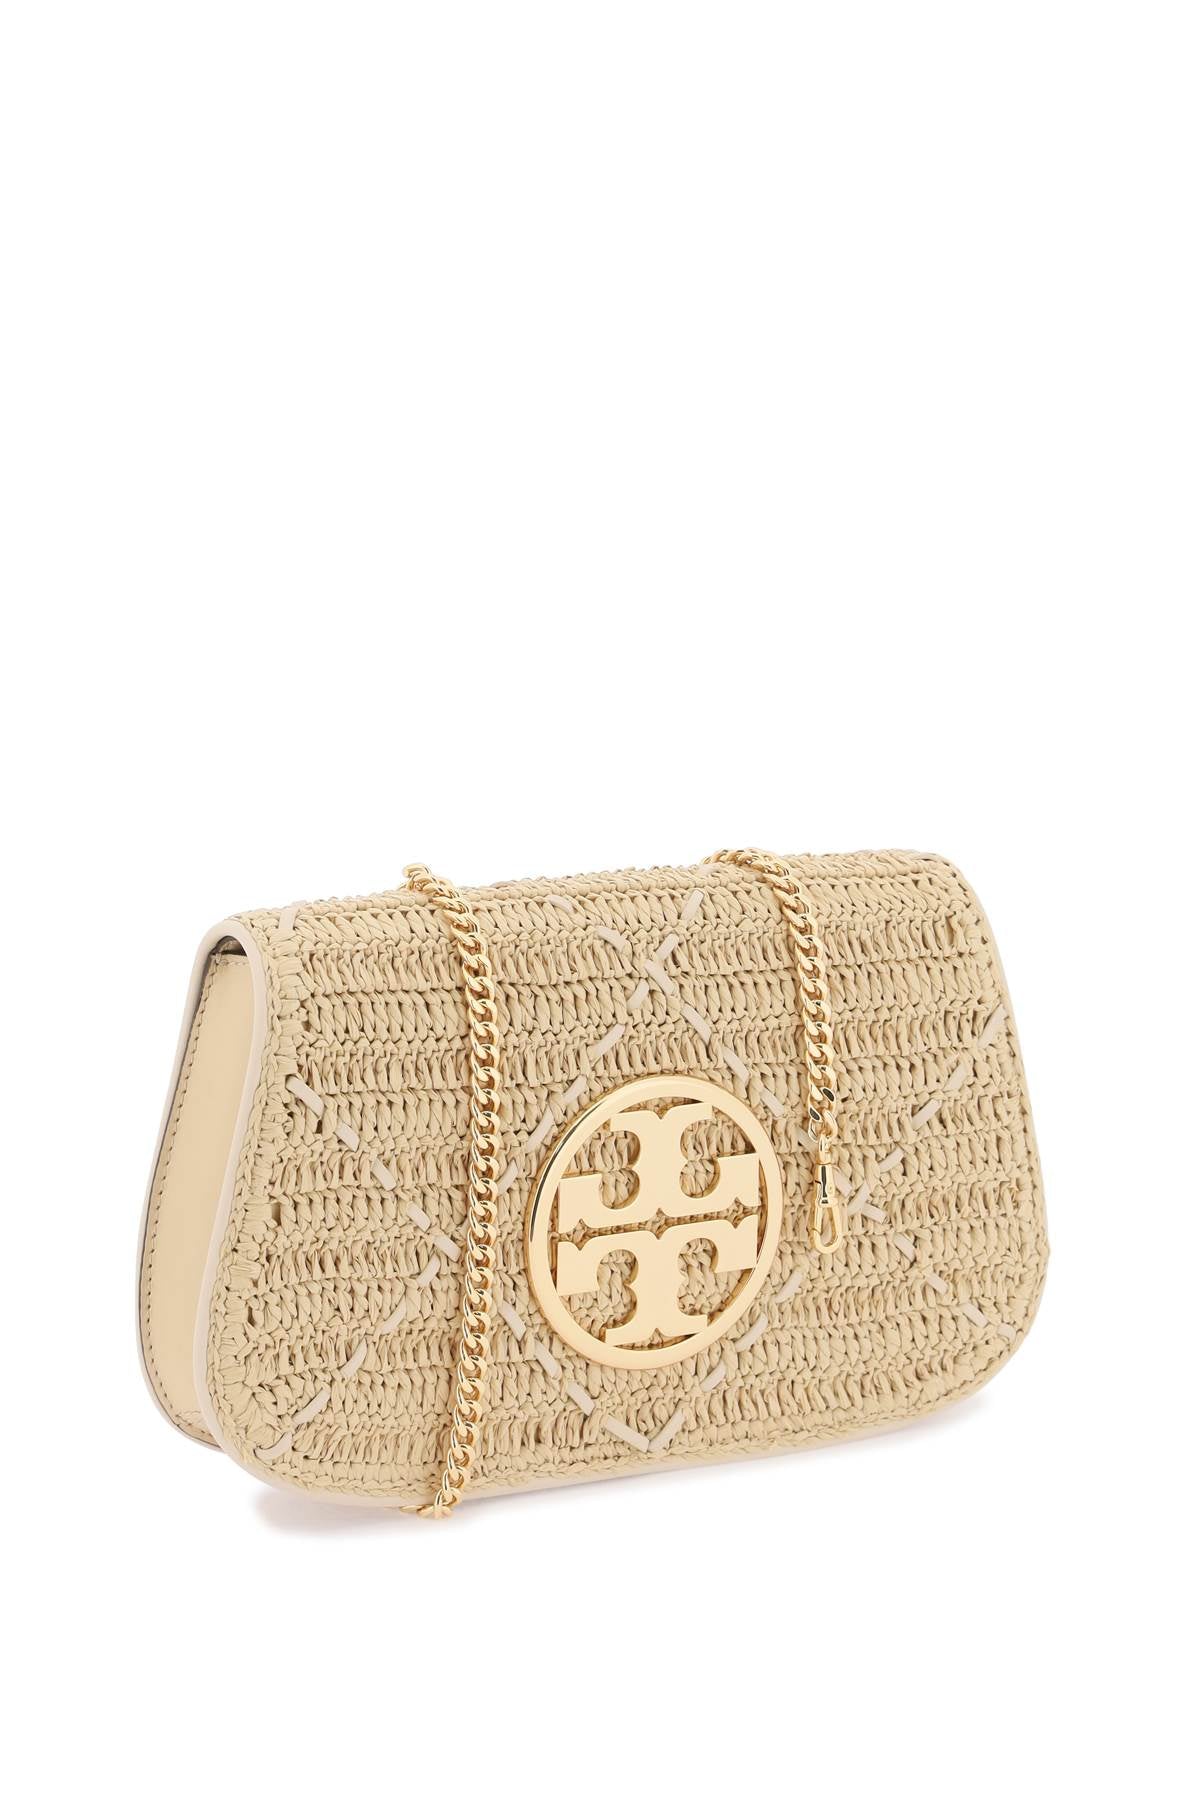 Tory Burch Replace With Double Quotereva Raffia   Beige